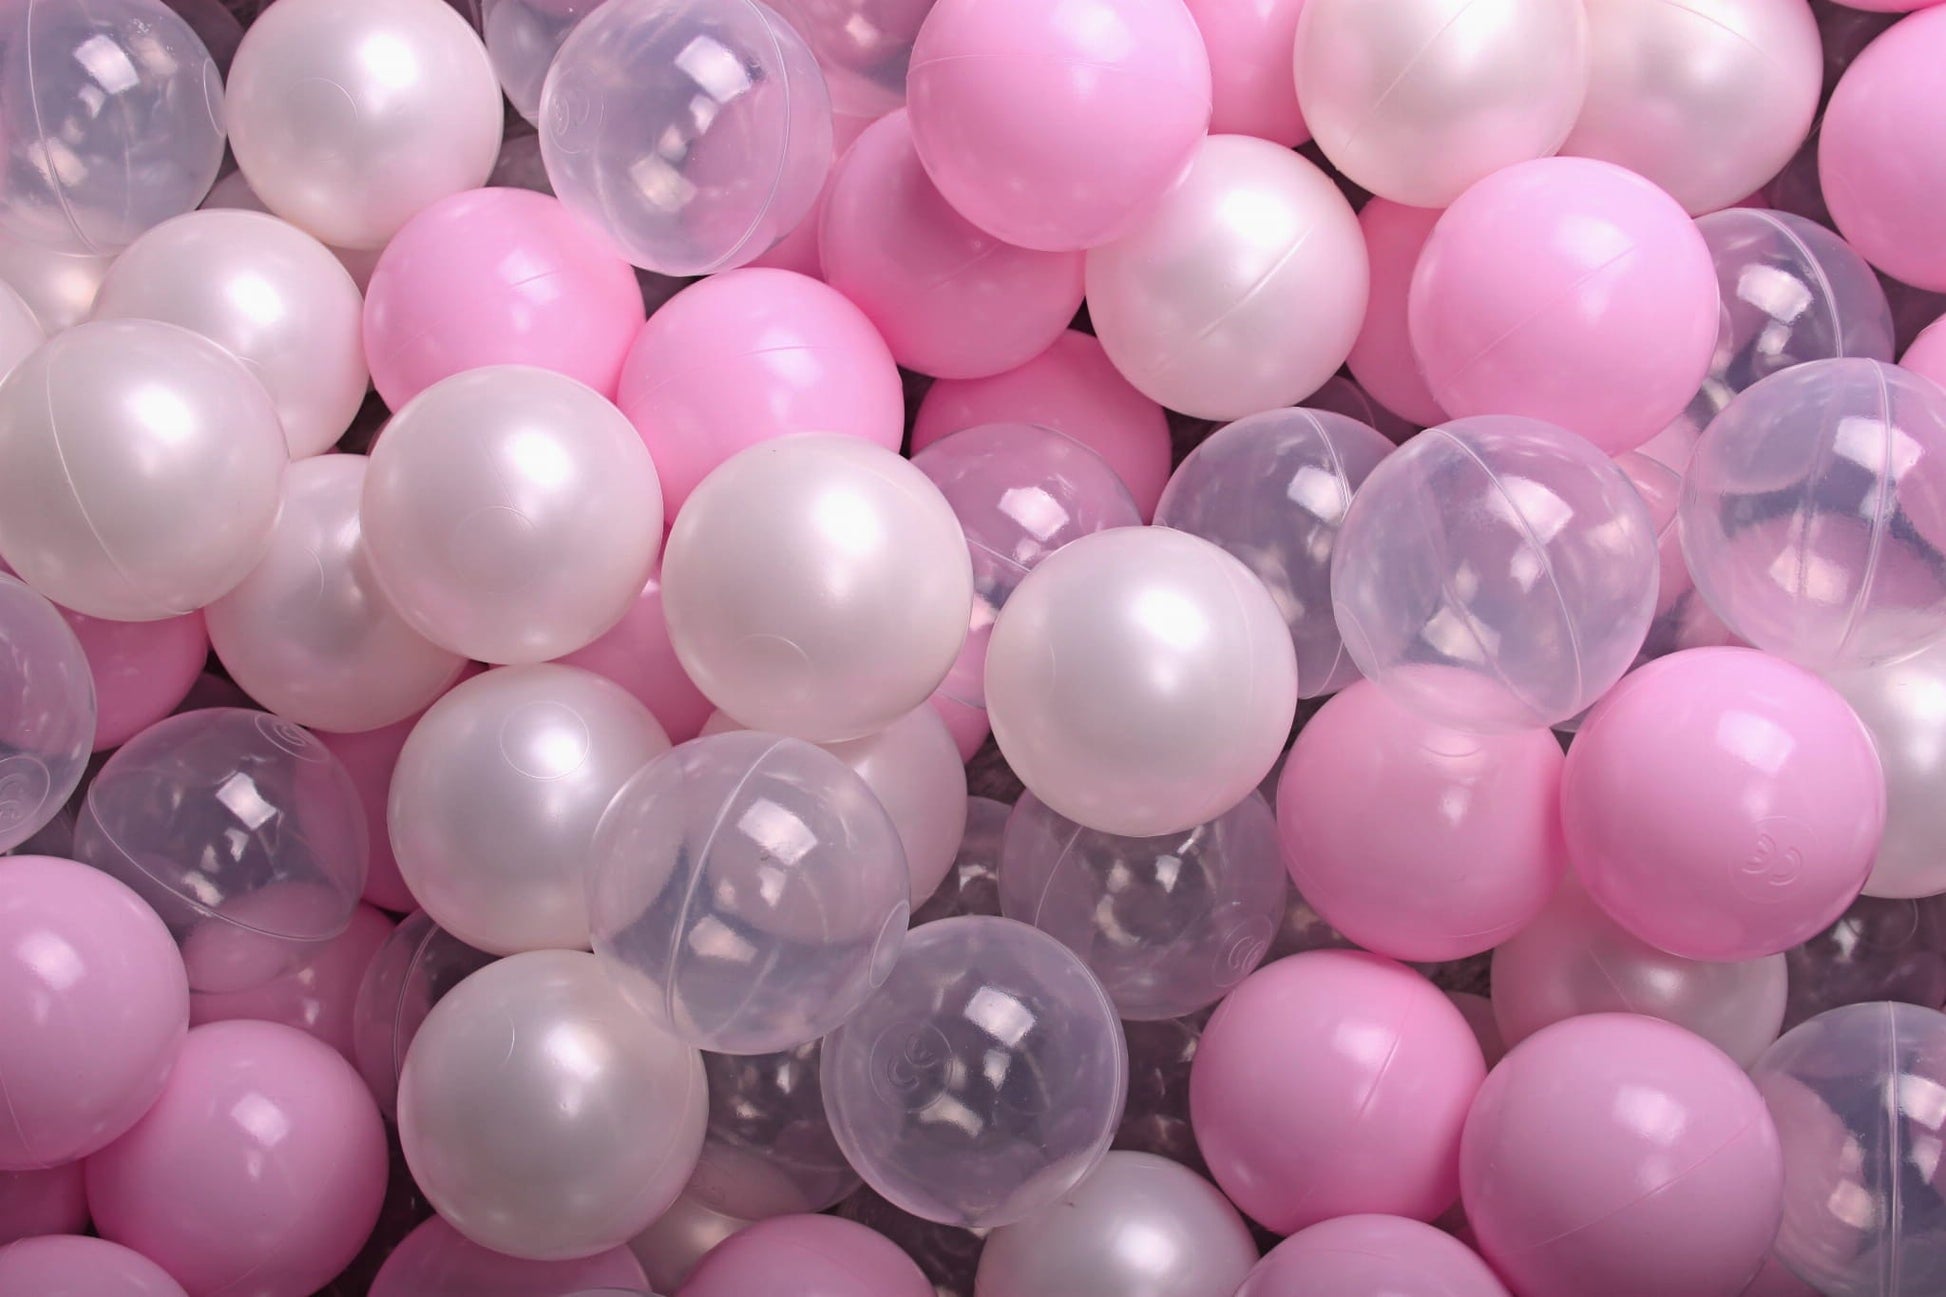 Luxury Cotton Round Ball Pit - Sparkling 'n Warm For Kids By MeowBaby - Stylemykid.com